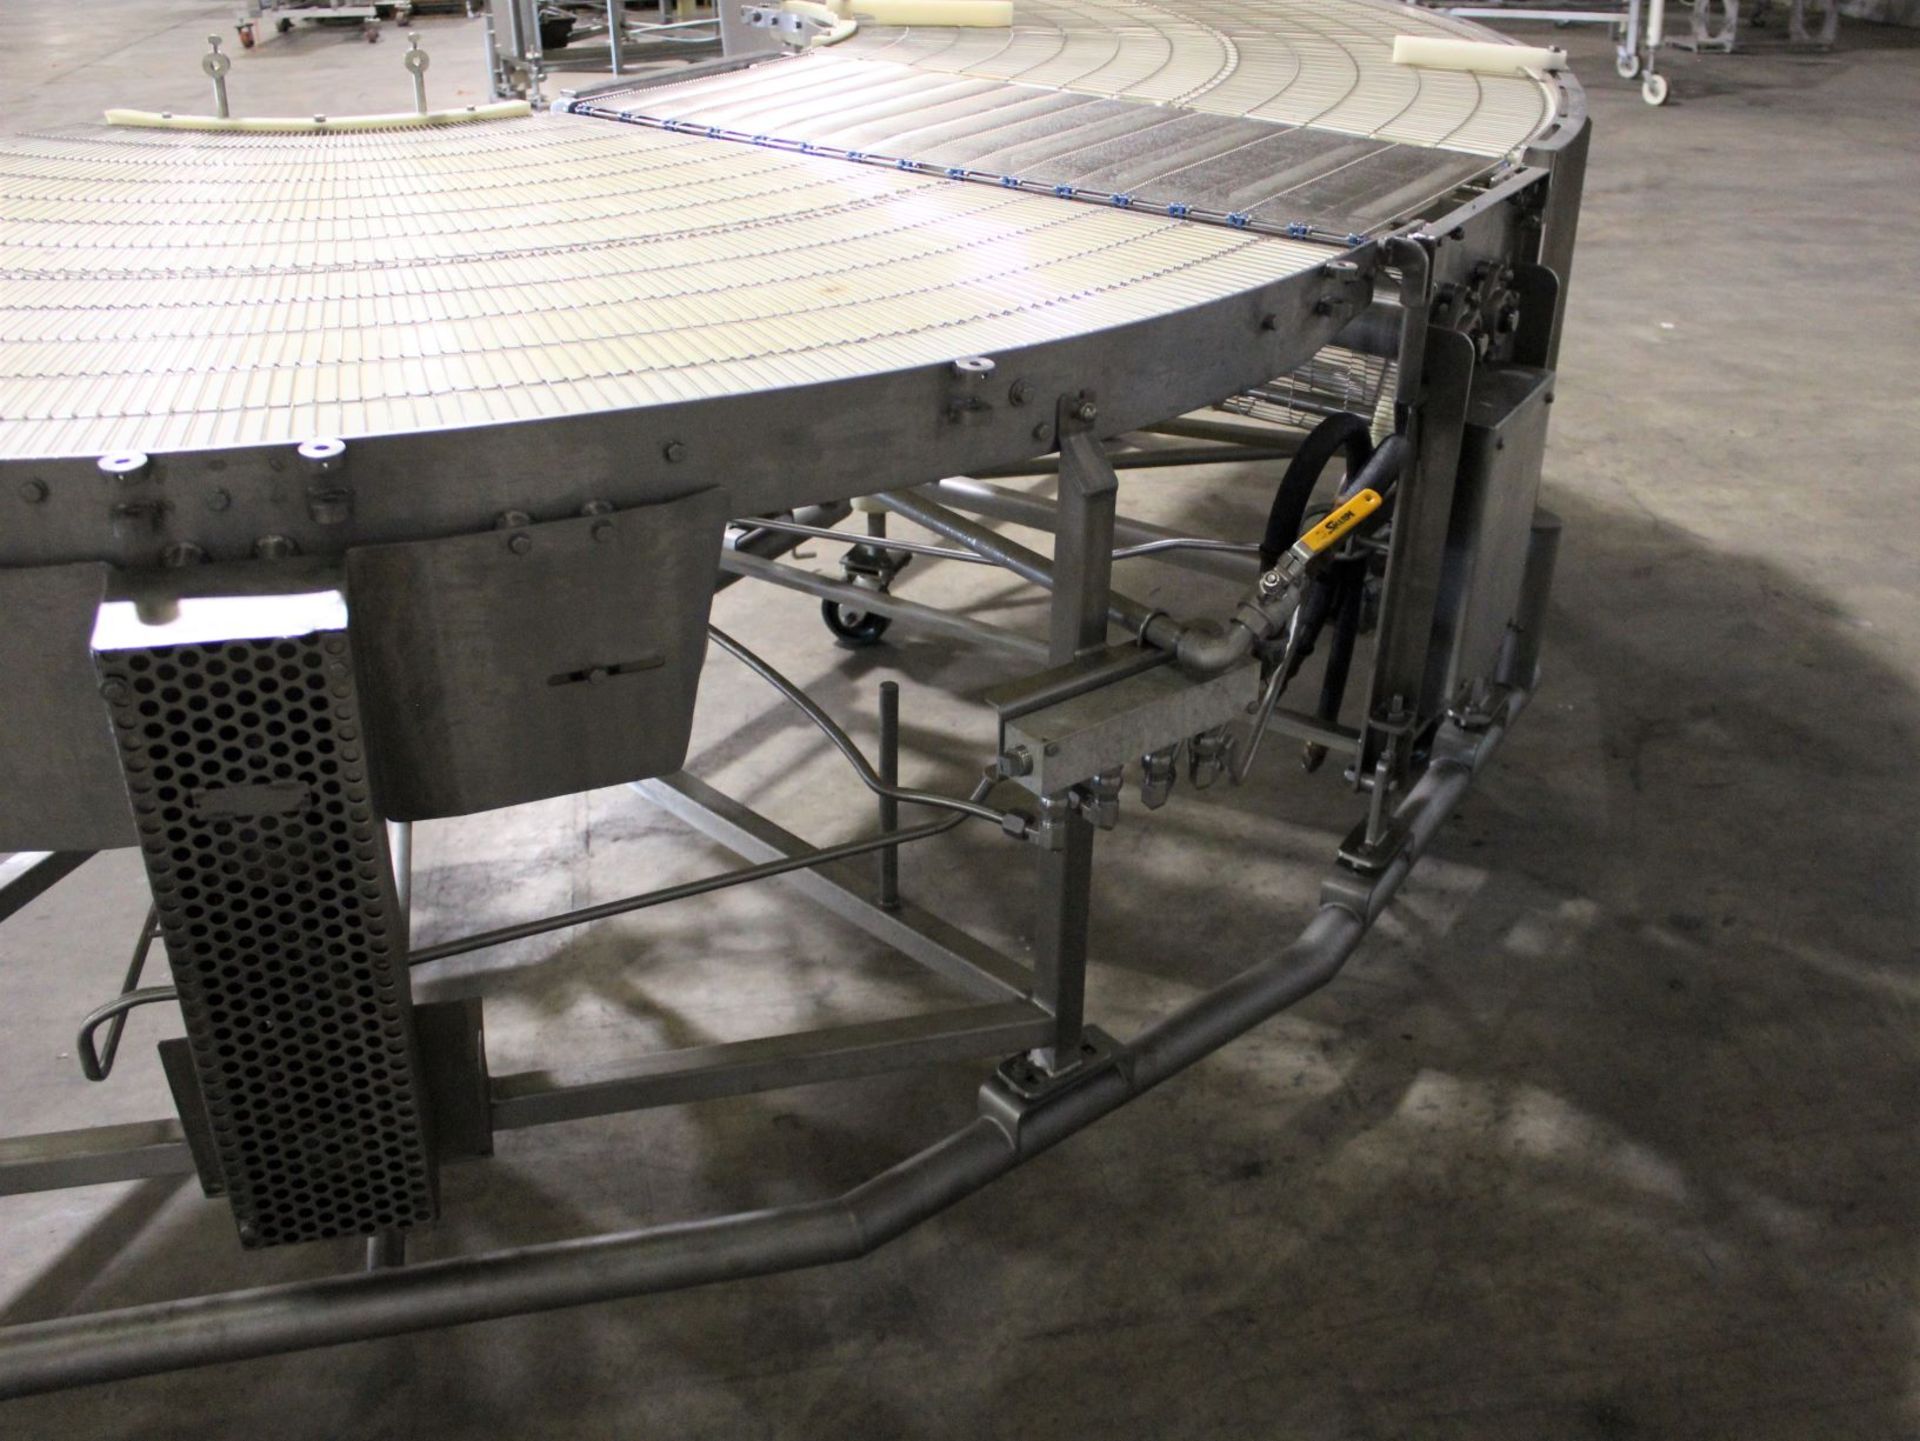 42" 180 Conveyor System, Item# mtl42180consys-1, Located in: Gainsville, GA - Image 3 of 5